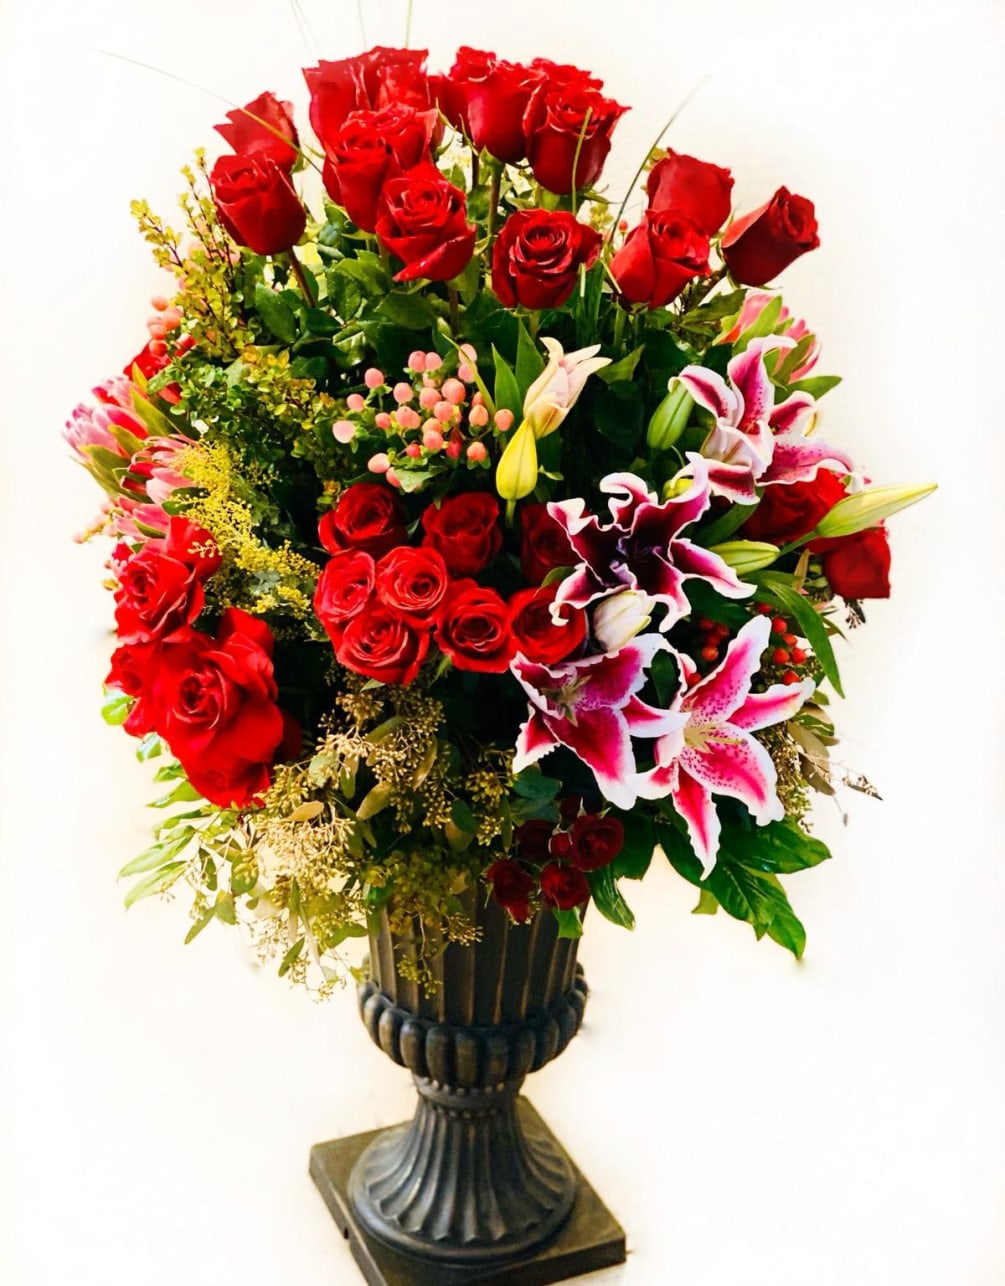 Magnificent and bold, this impressive and luxurious arrangement features an assortment of